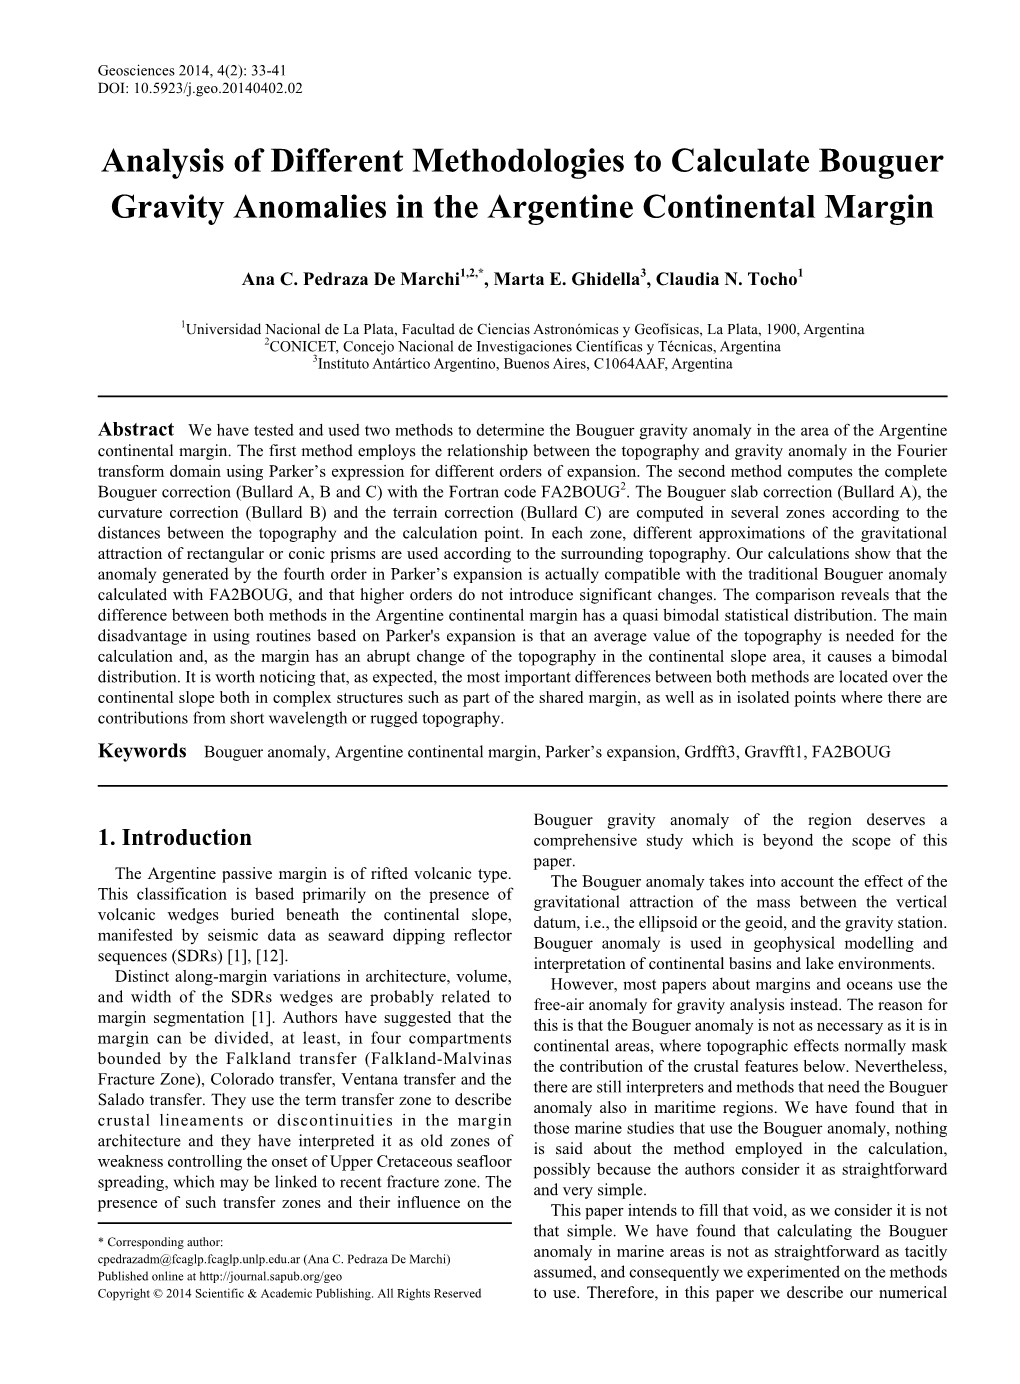 Analysis of Different Methodologies to Calculate Bouguer Gravity Anomalies in the Argentine Continental Margin